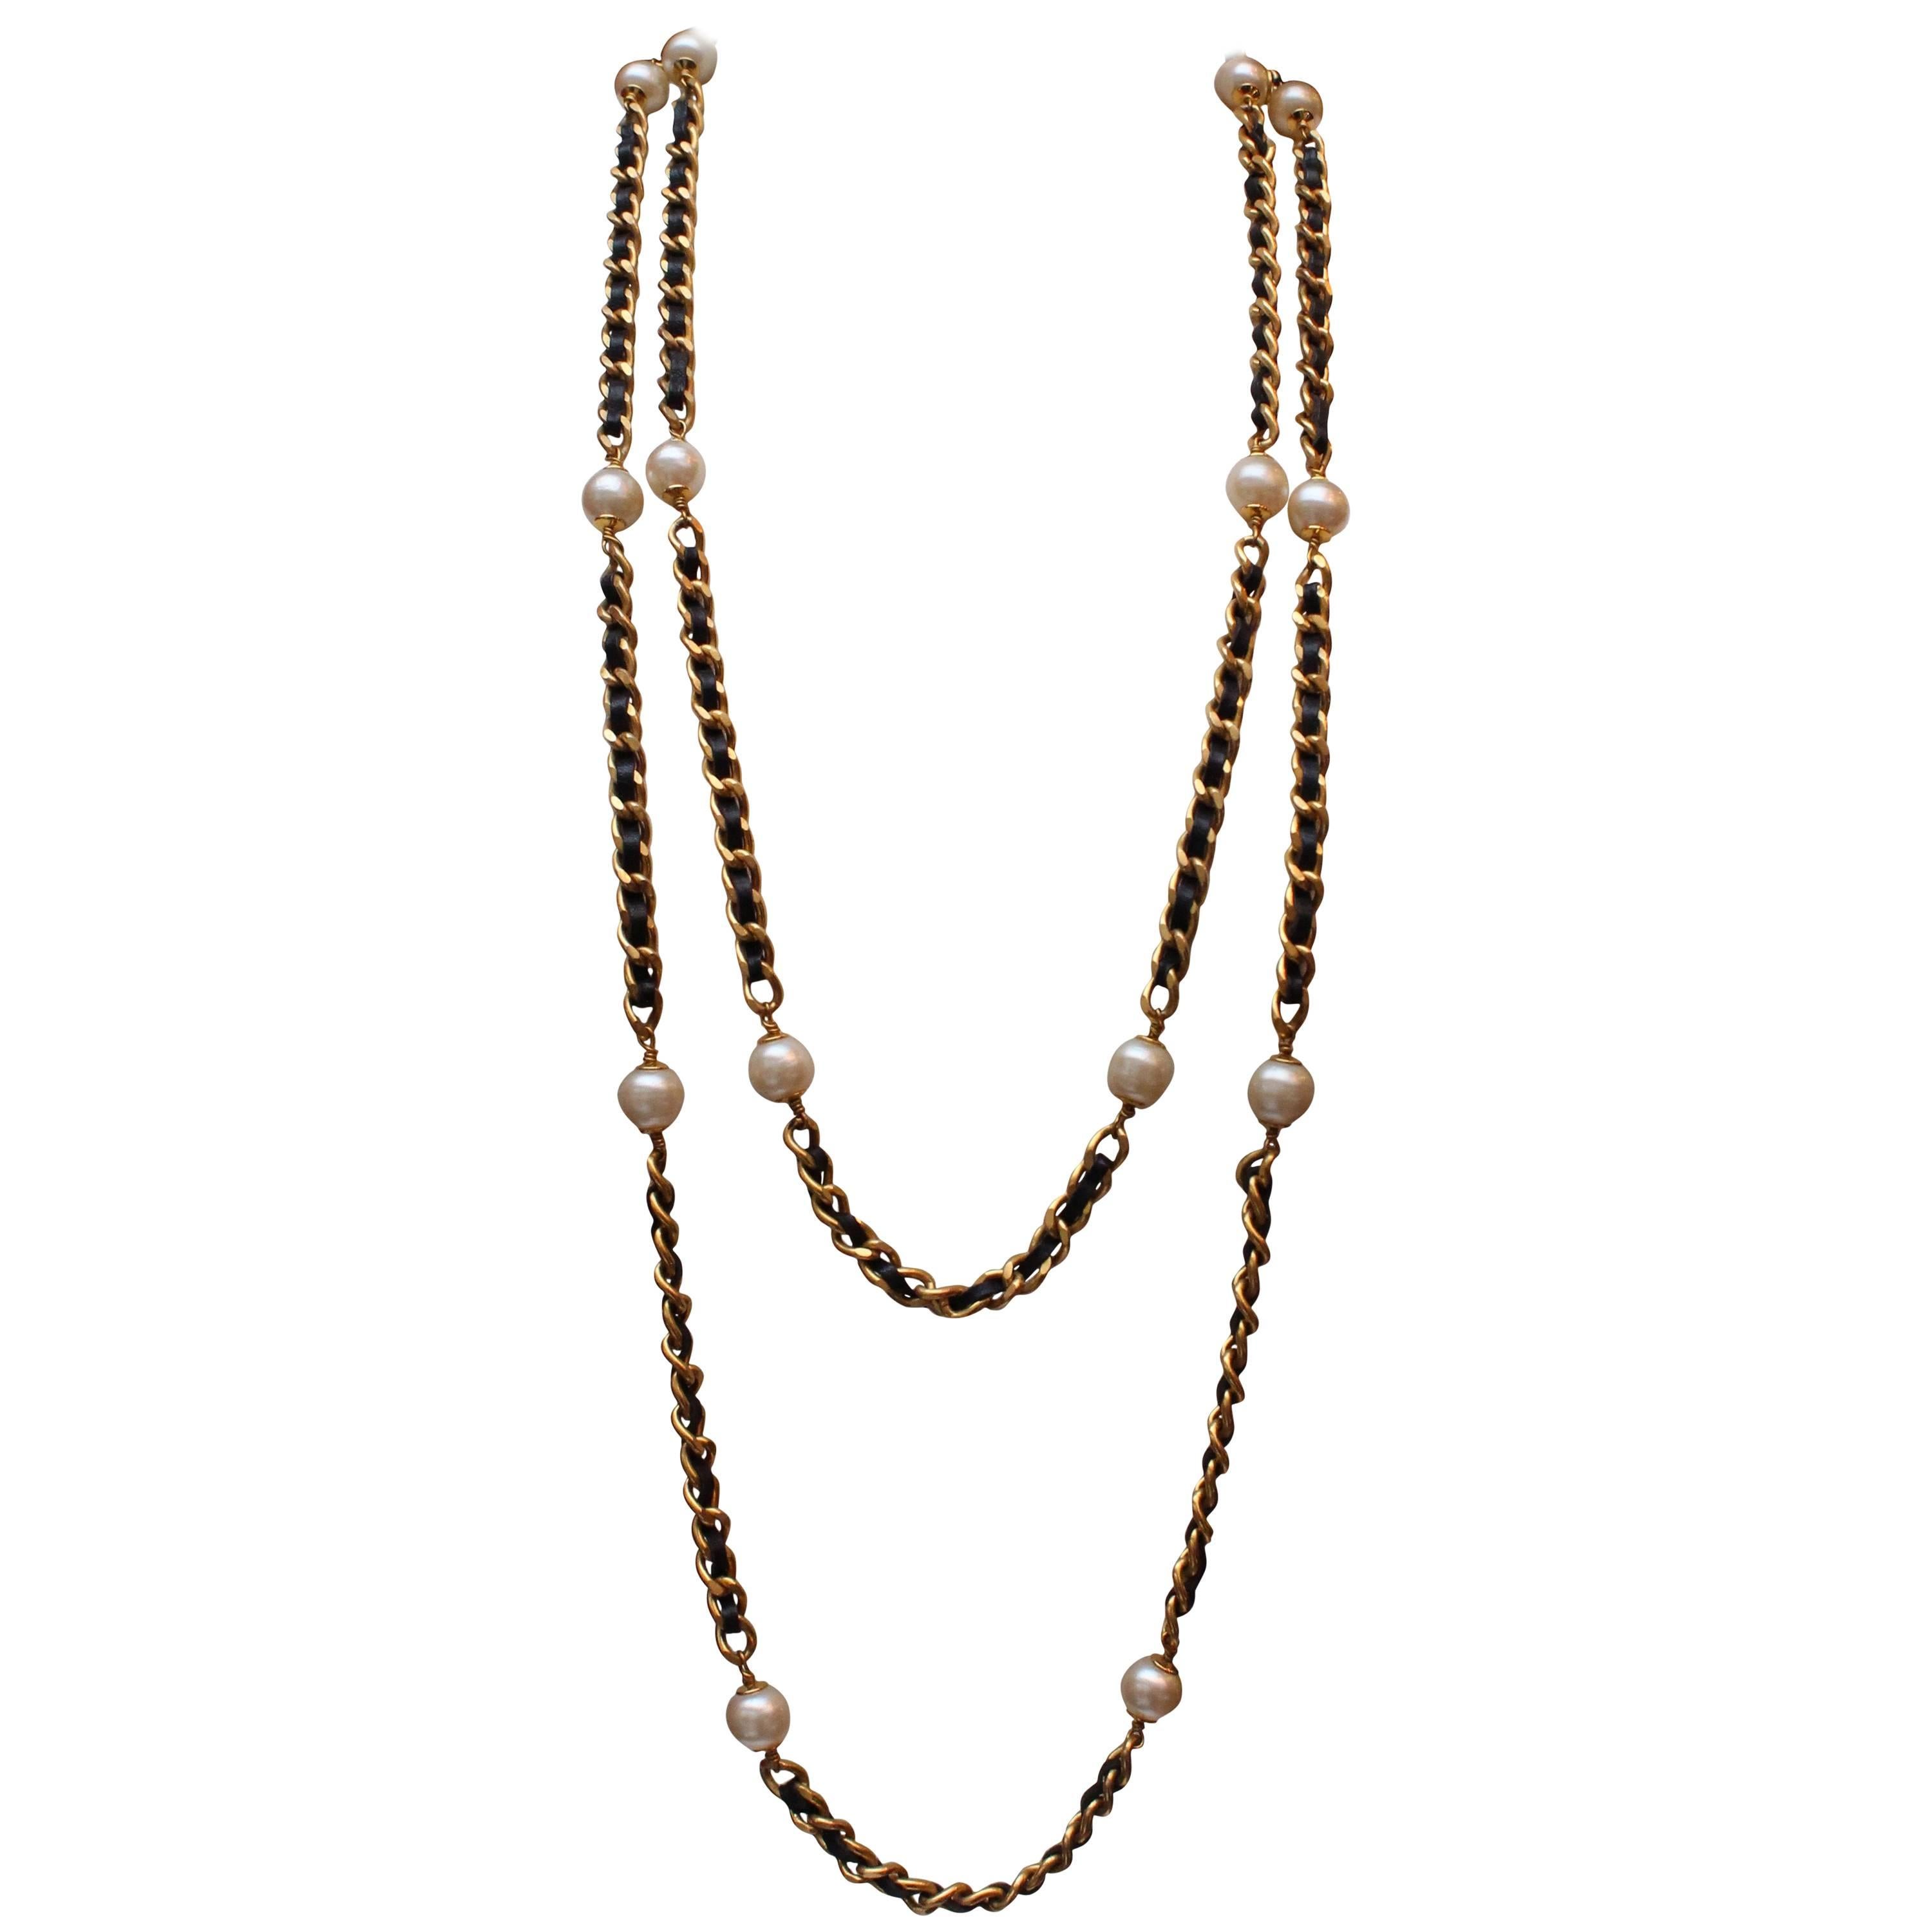 Chanel long chain sautoir composed of black leather and gilded metal chain, 1993